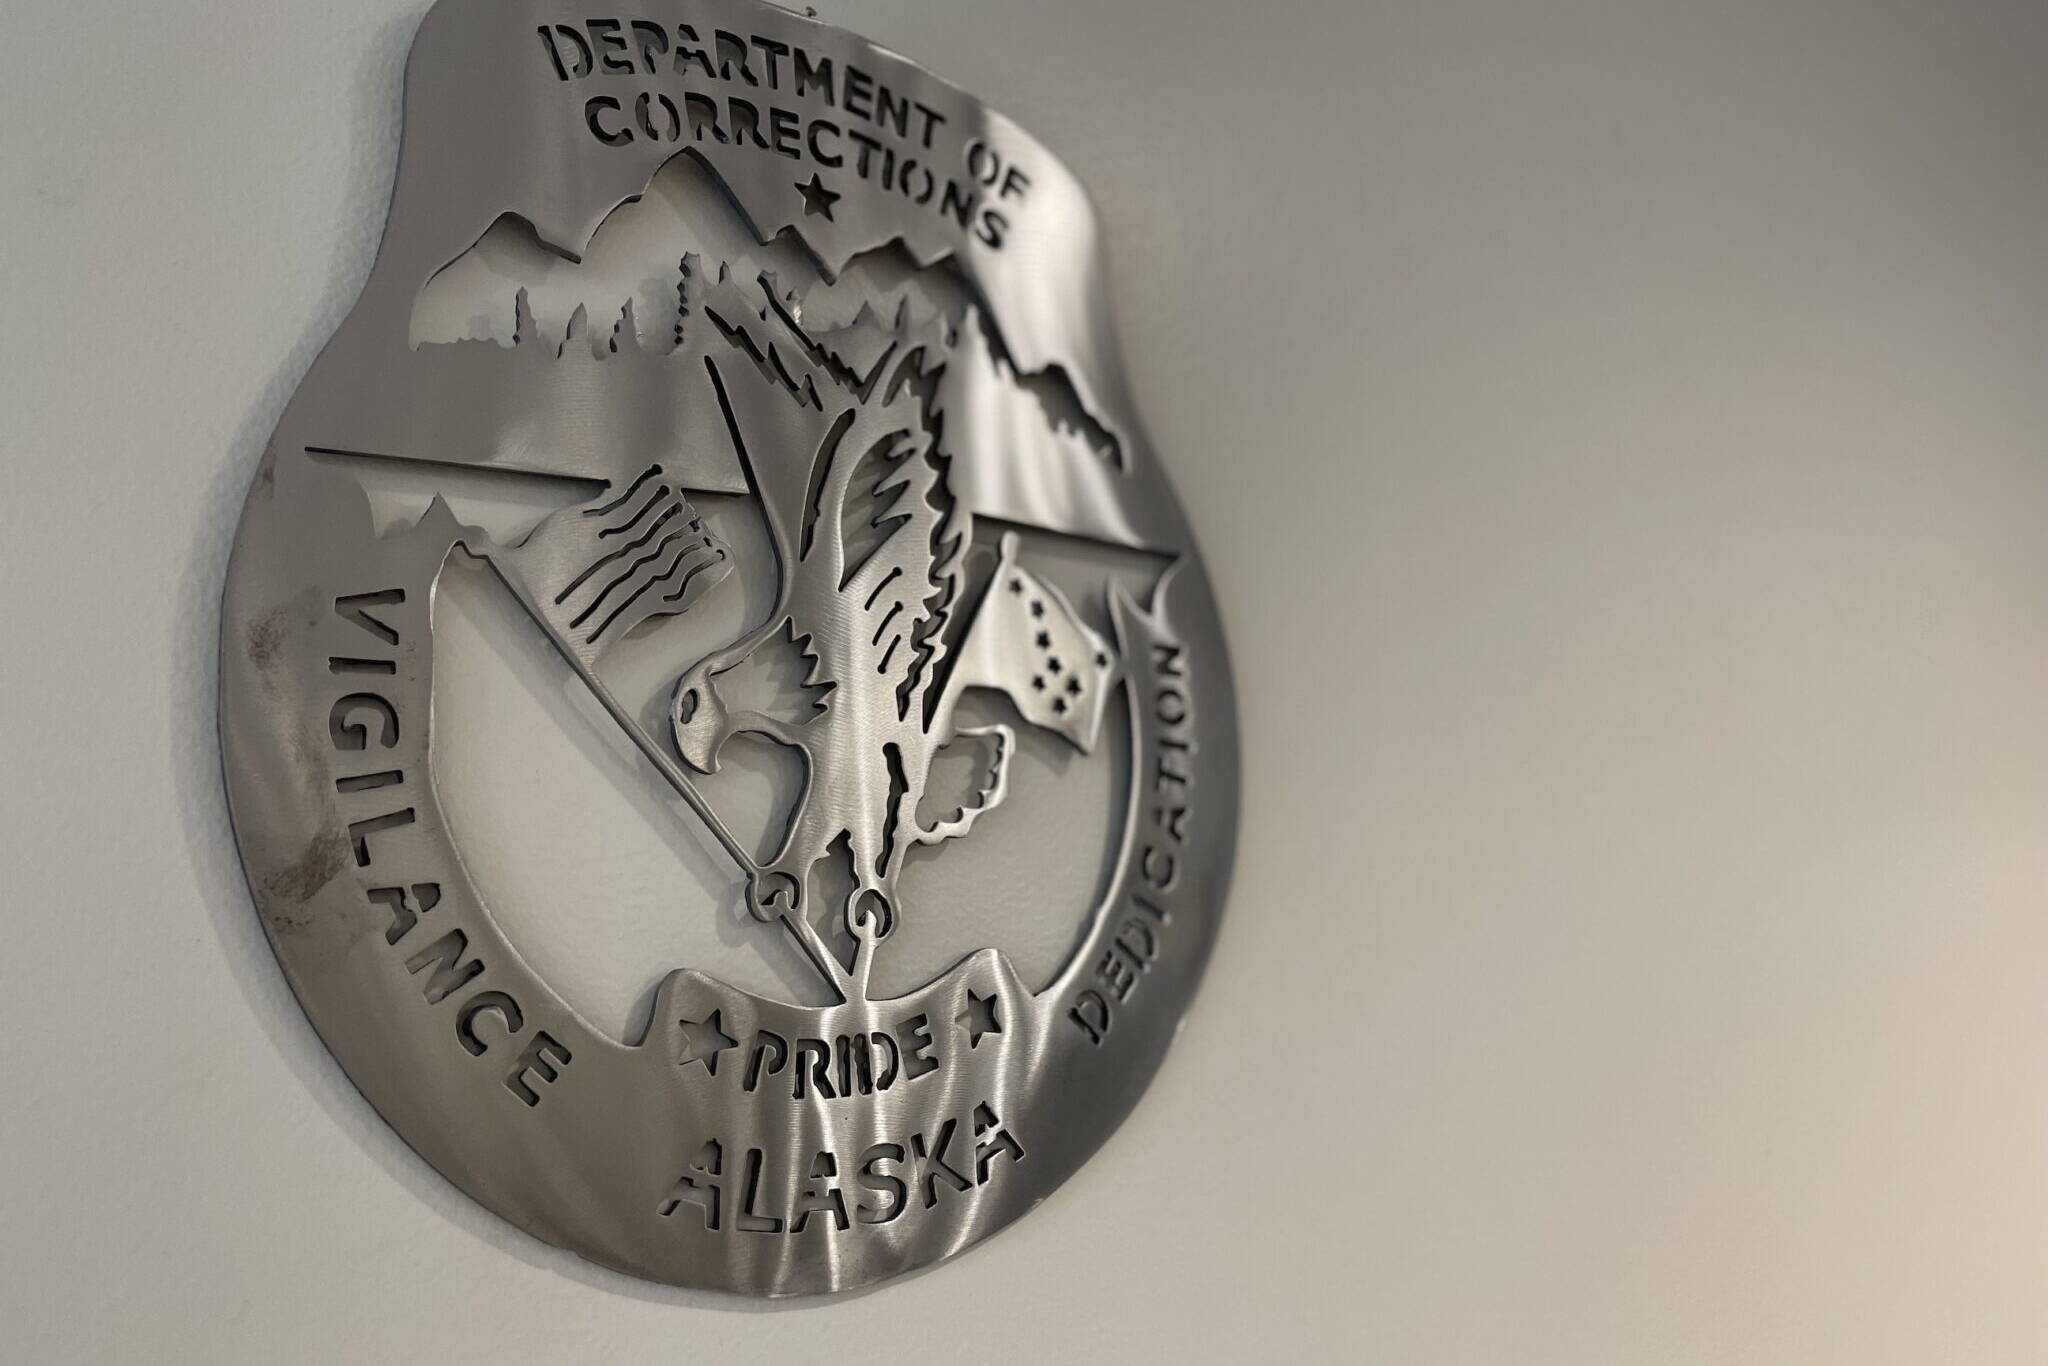 This symbol is inside of the Alaska Department of Corrections office on Sept. 7, 2022, in Douglas. (Photo by Lisa Phu/Alaska Beacon)